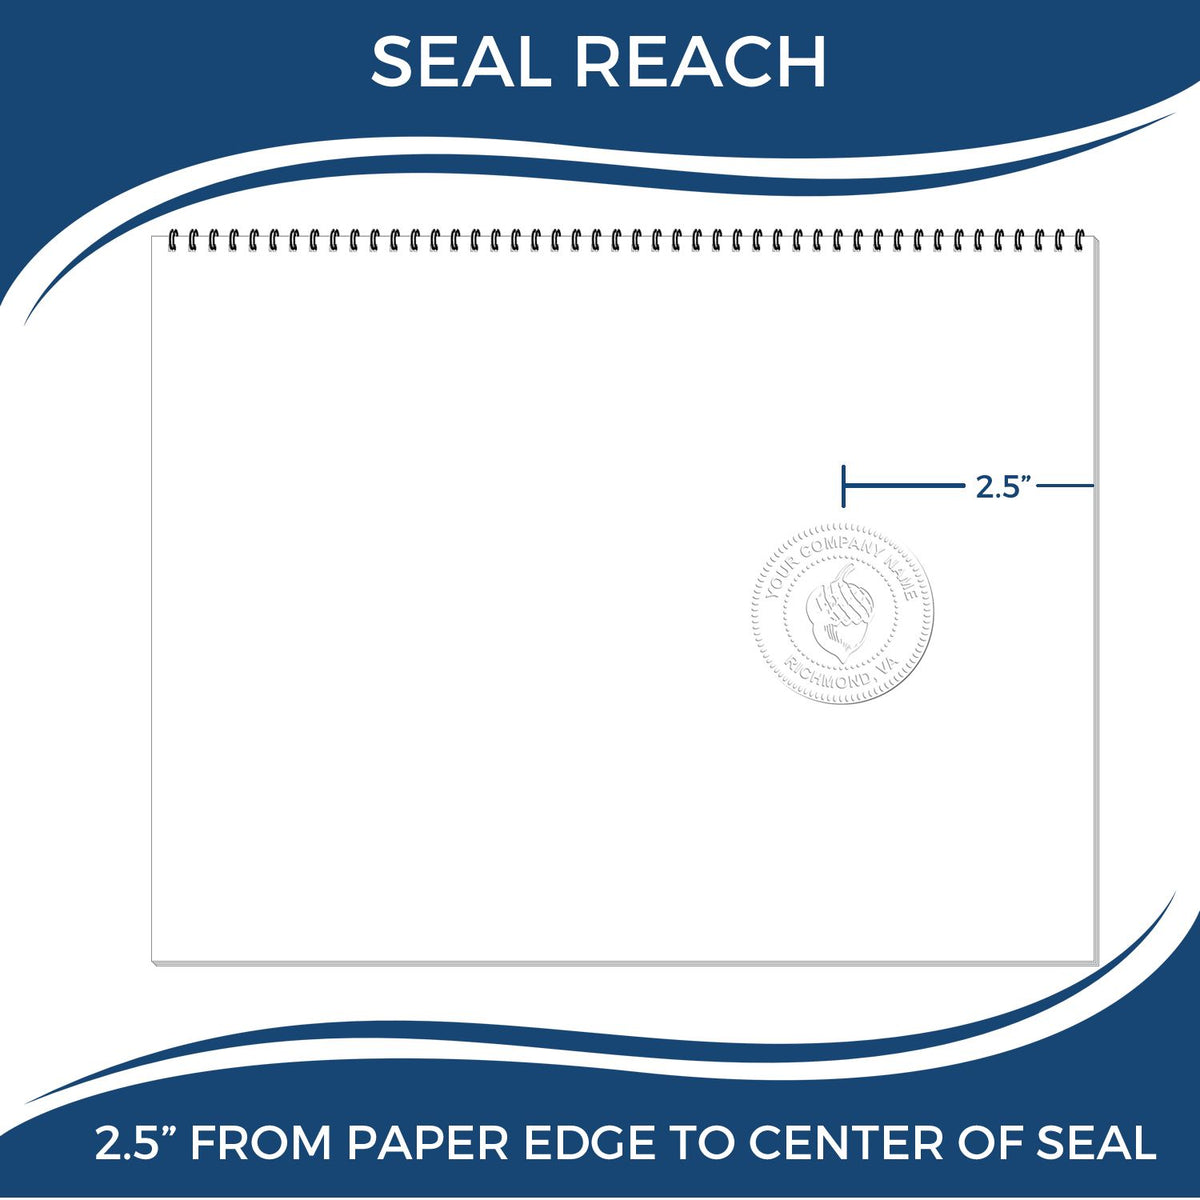 An infographic showing the seal reach which is represented by a ruler and a miniature seal image of the Long Reach West Virginia Geology Seal